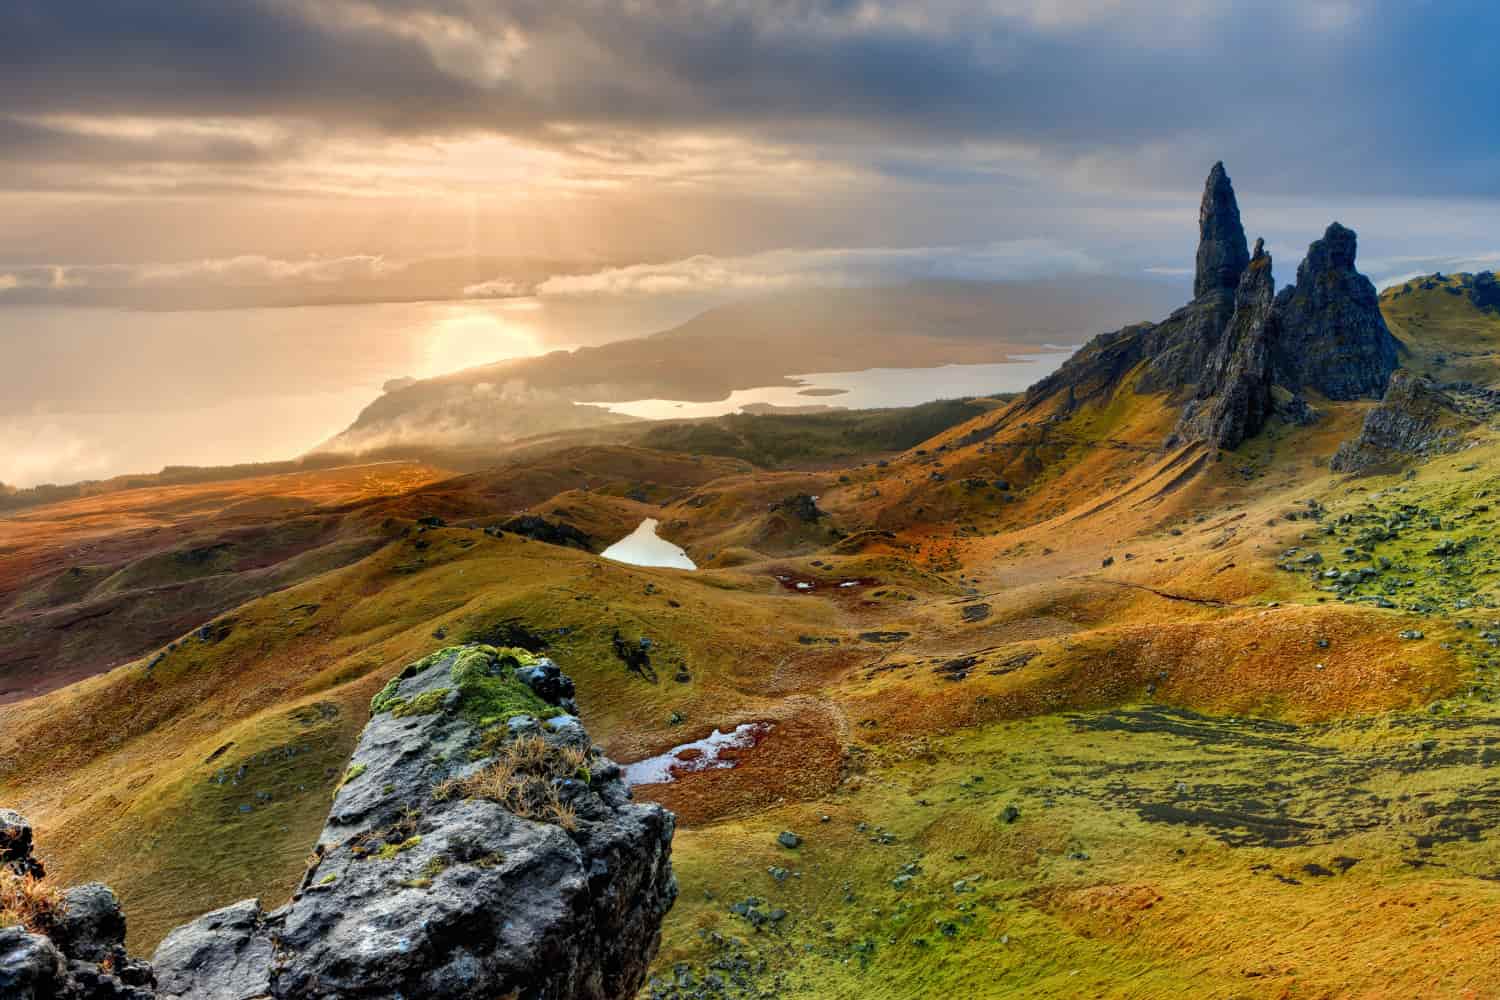 The mountains of Skye